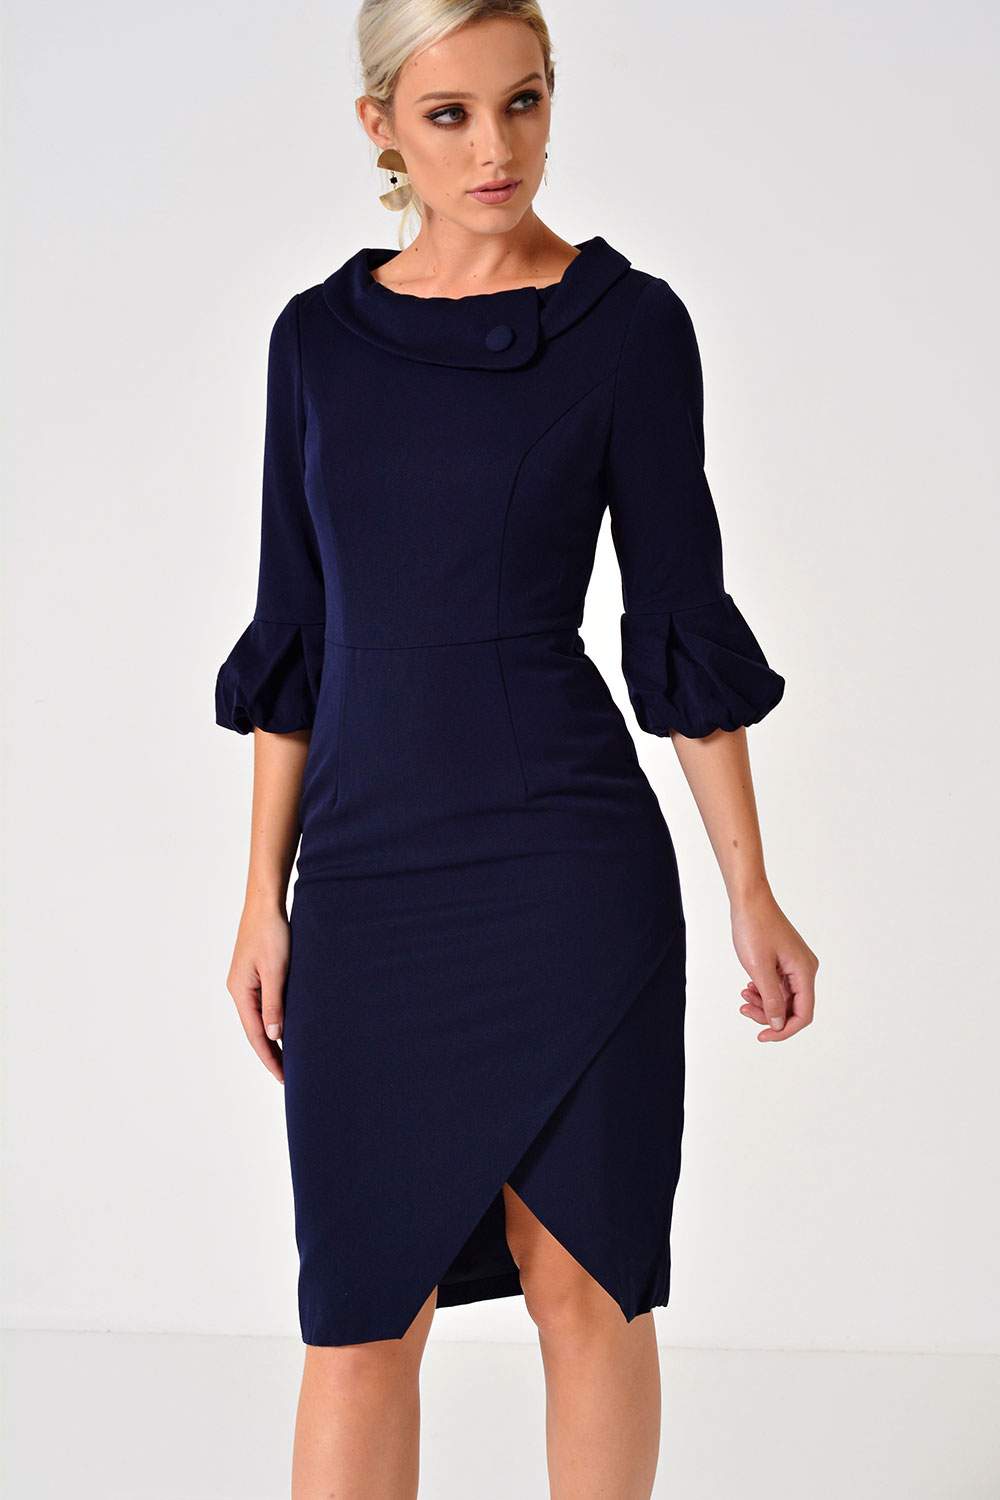 Jolie Moi Audrey 3/4 Frill Sleeve Dress in Navy | iCLOTHING - iCLOTHING